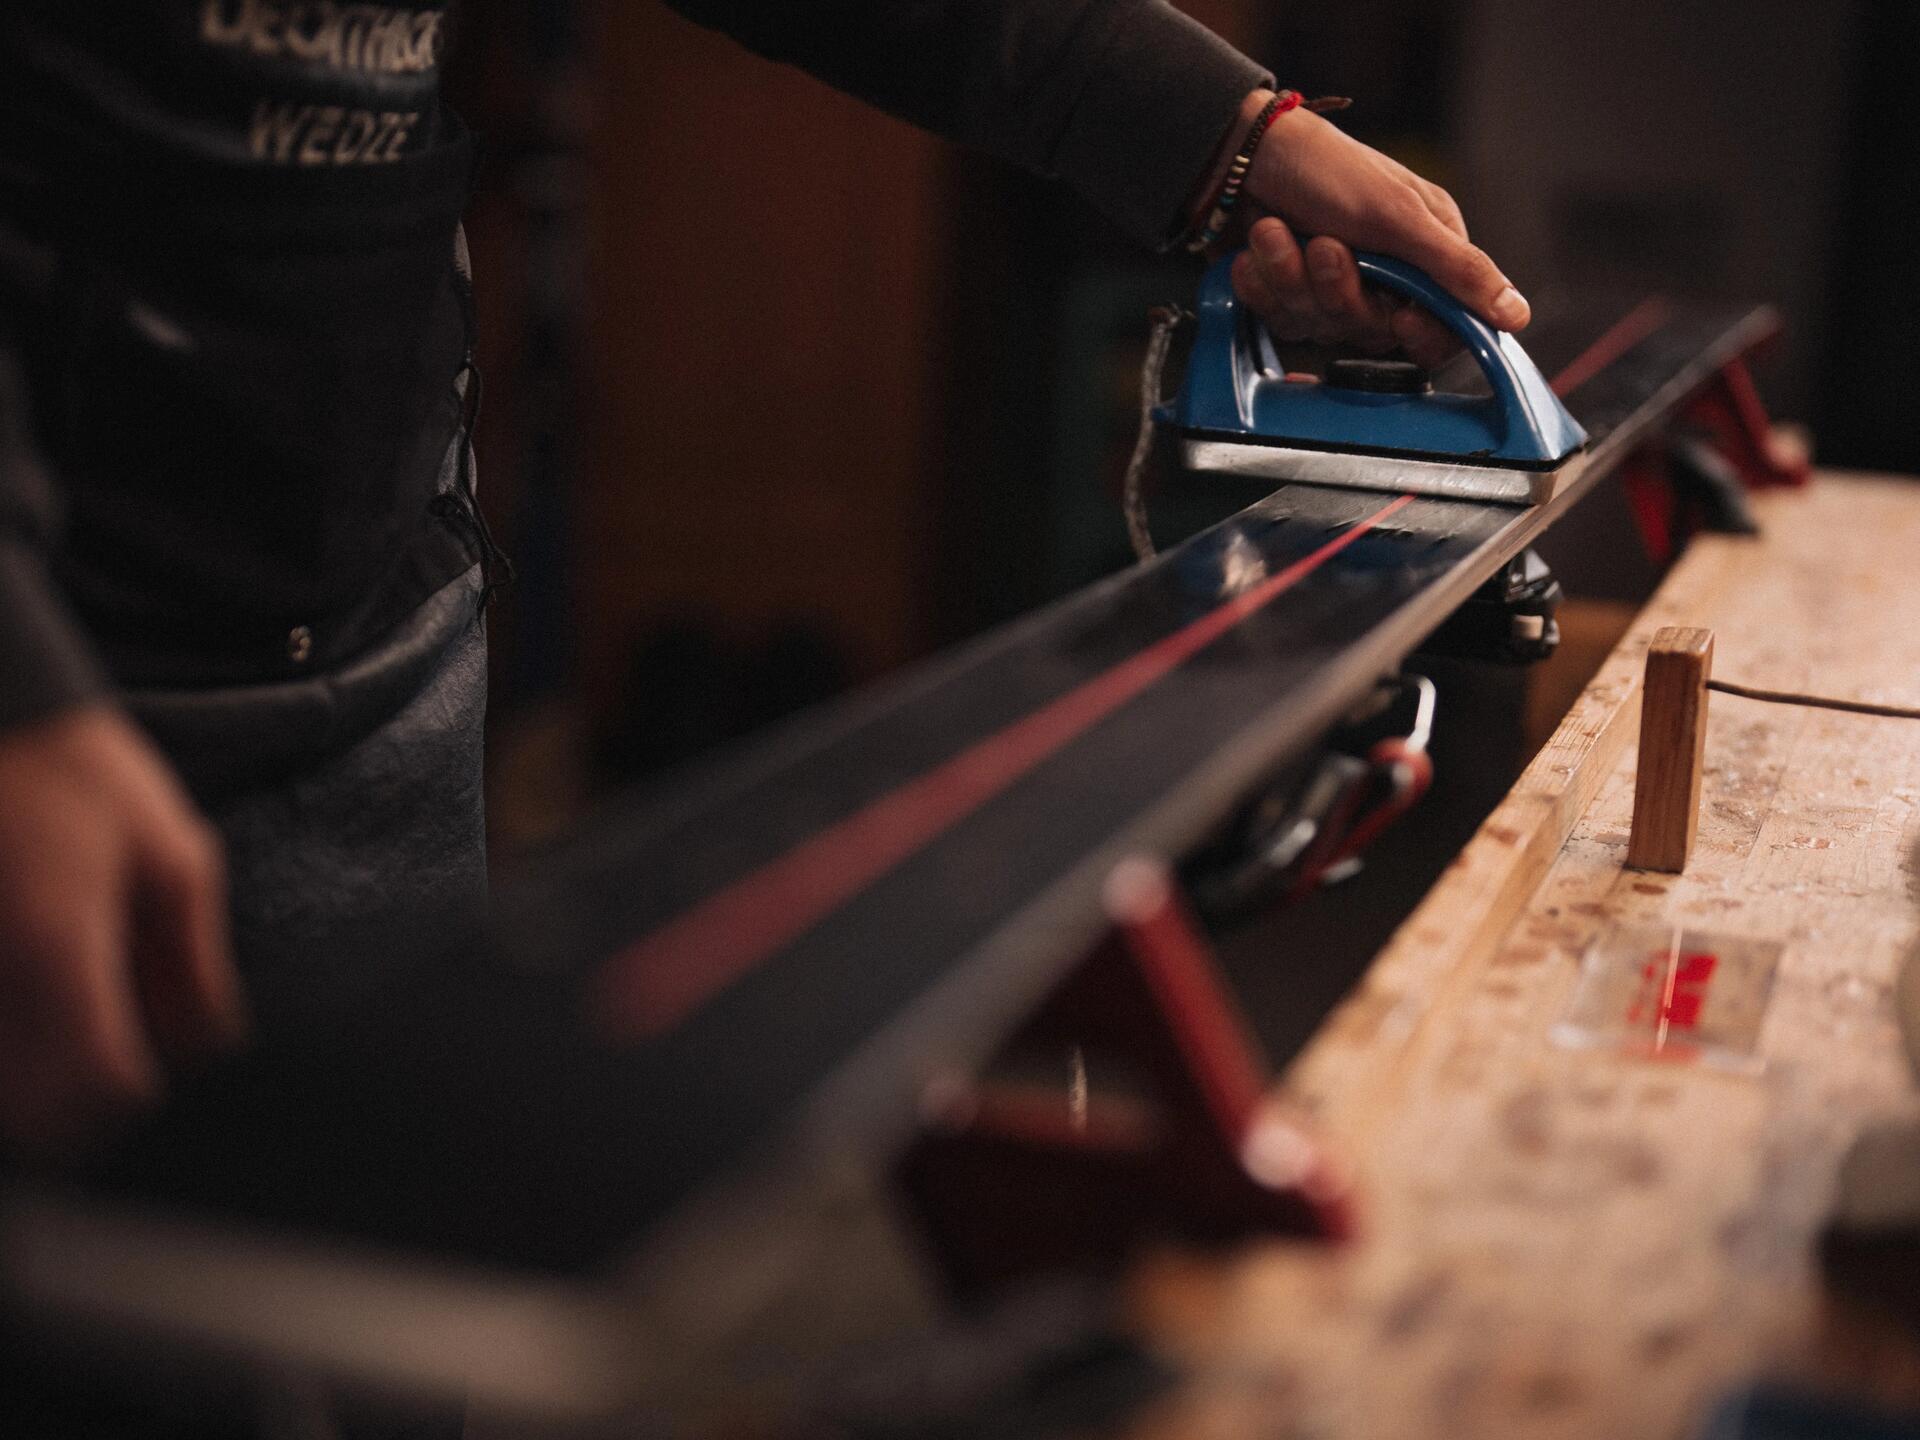 How to wax downhill skis